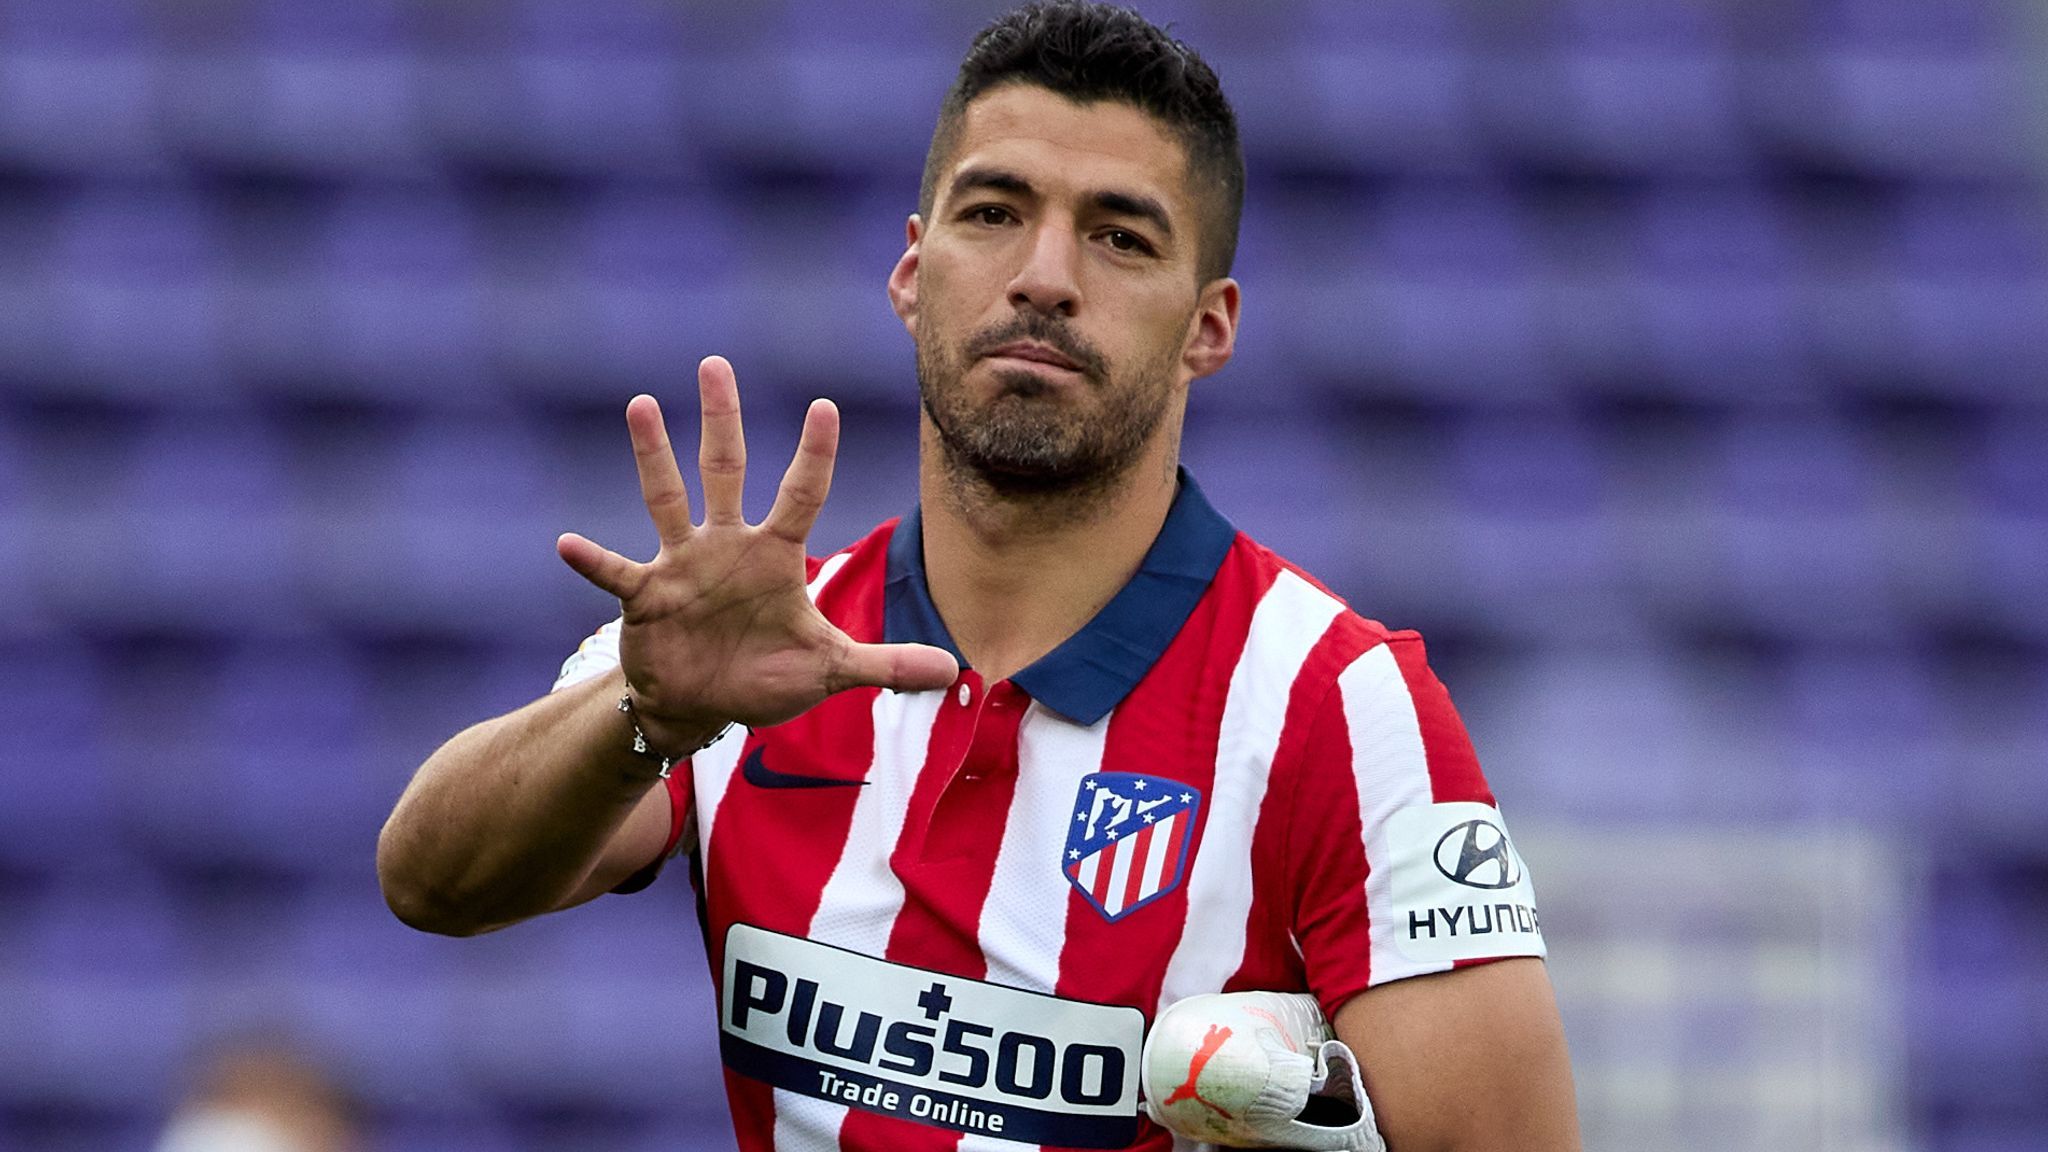 Luis Suarez: Atletico Madrid La Liga champion says he was 'looked down on' in Barcelona exit